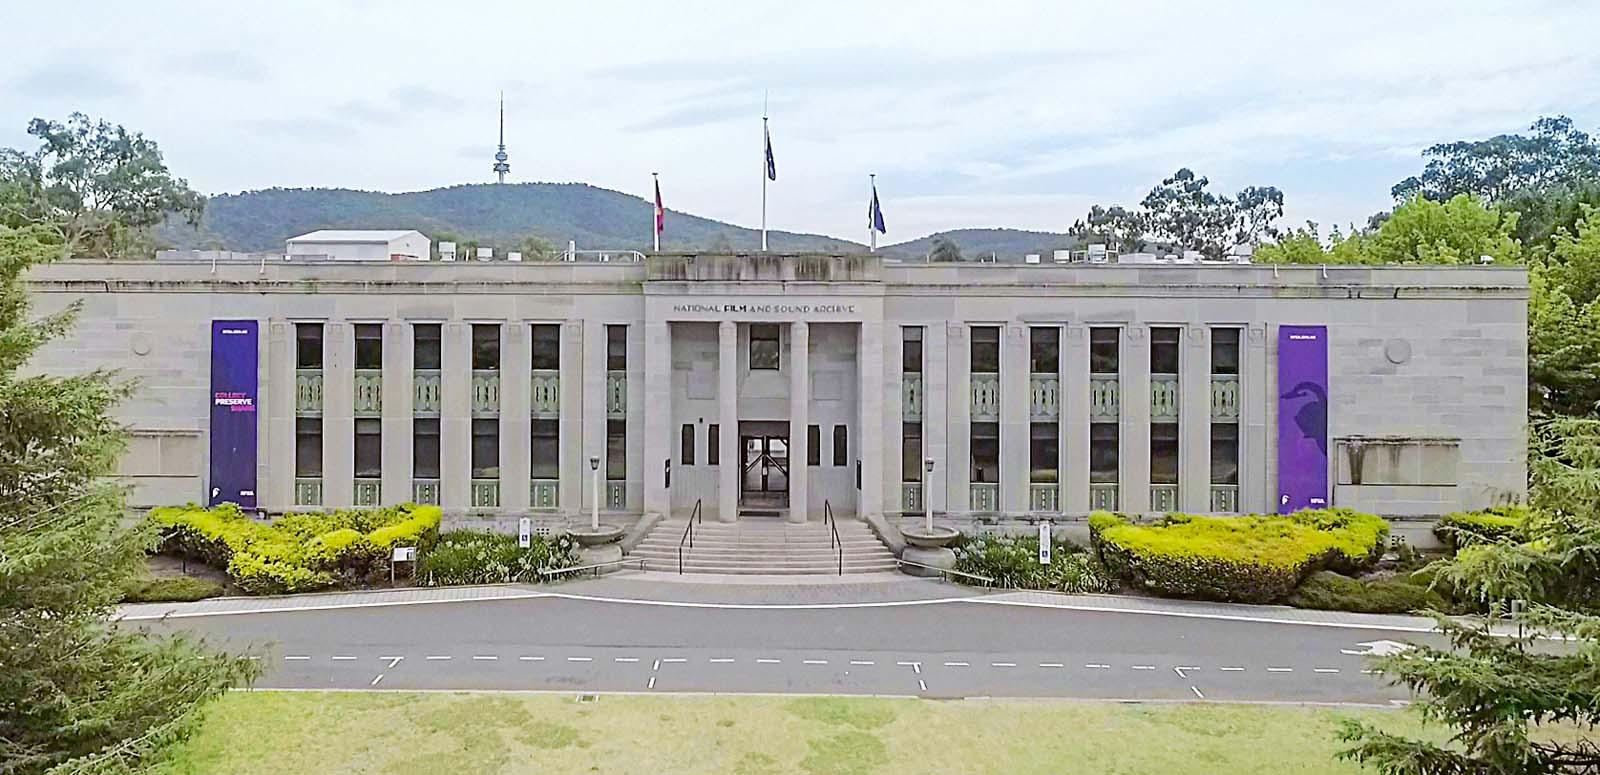 The NFSA building in Canberra